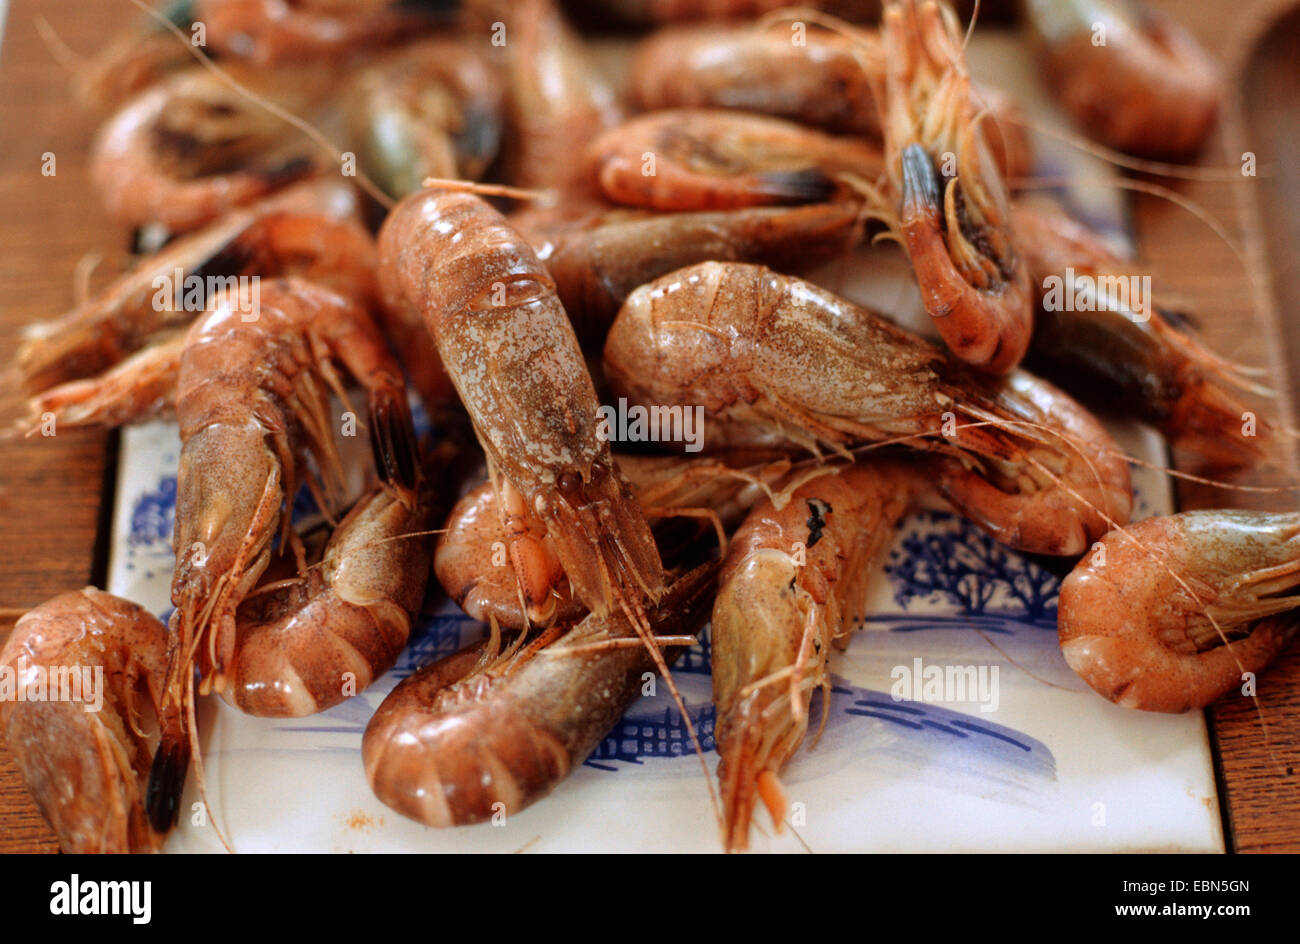 common shrimp, common European shrimp, brown shrimp (Crangon crangon), on the table, cooked and waiting to be shelled Stock Photo